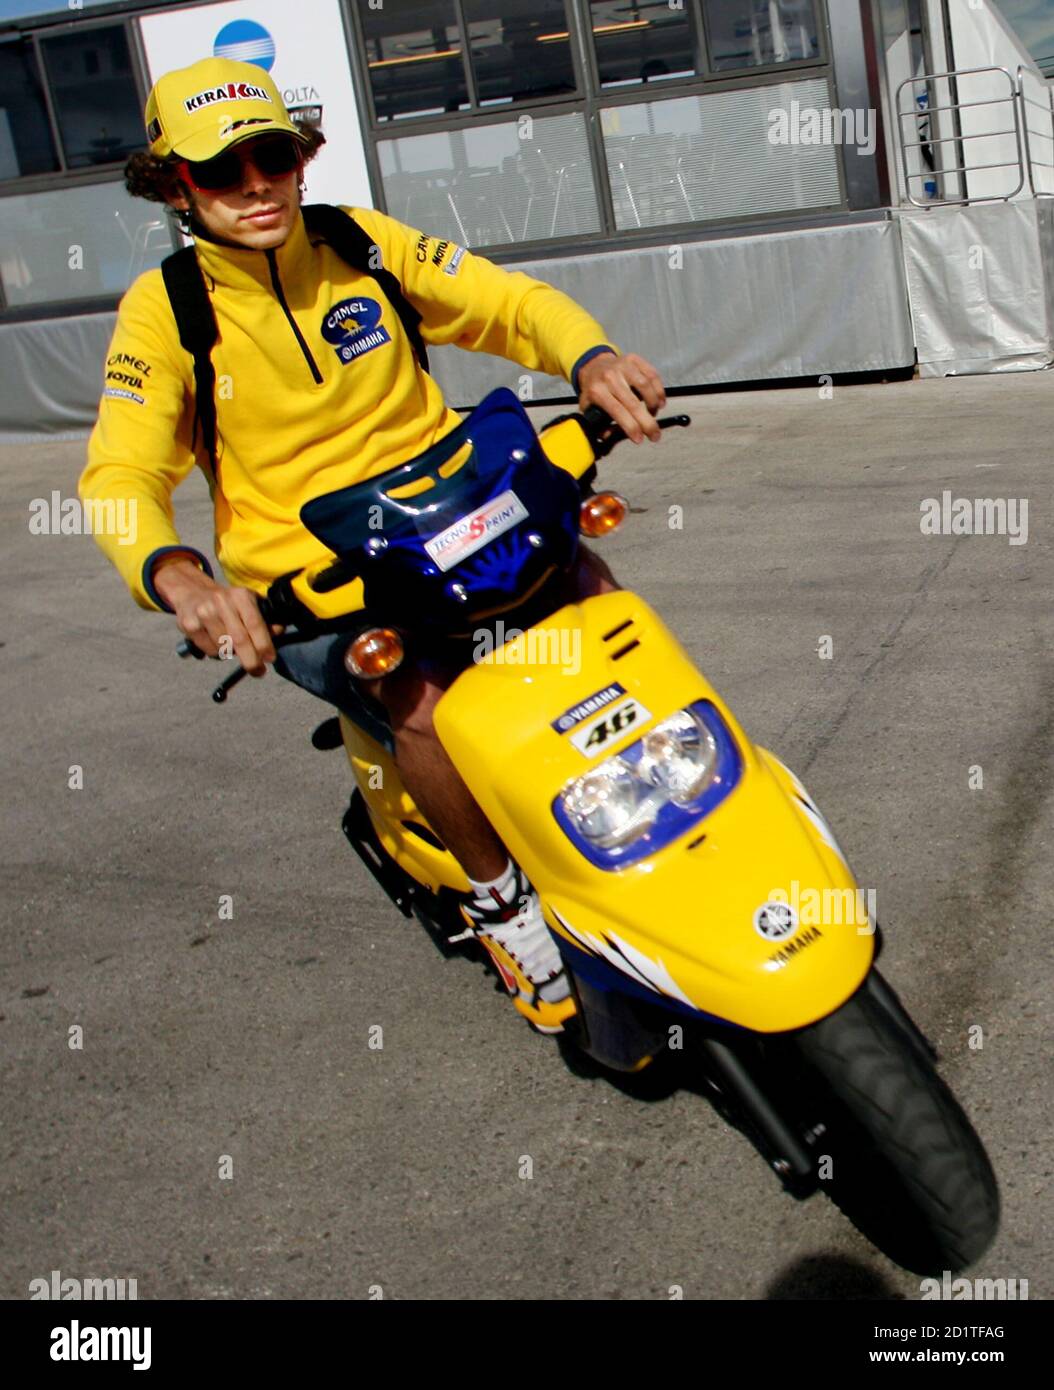 MotoGP rider Valentino Rossi of Italy rides a scooter before a training  session at the Jerez racetrack in Jerez, southern Spain, March 12, 2006.  The new MotoGP season kicks off in Jerez